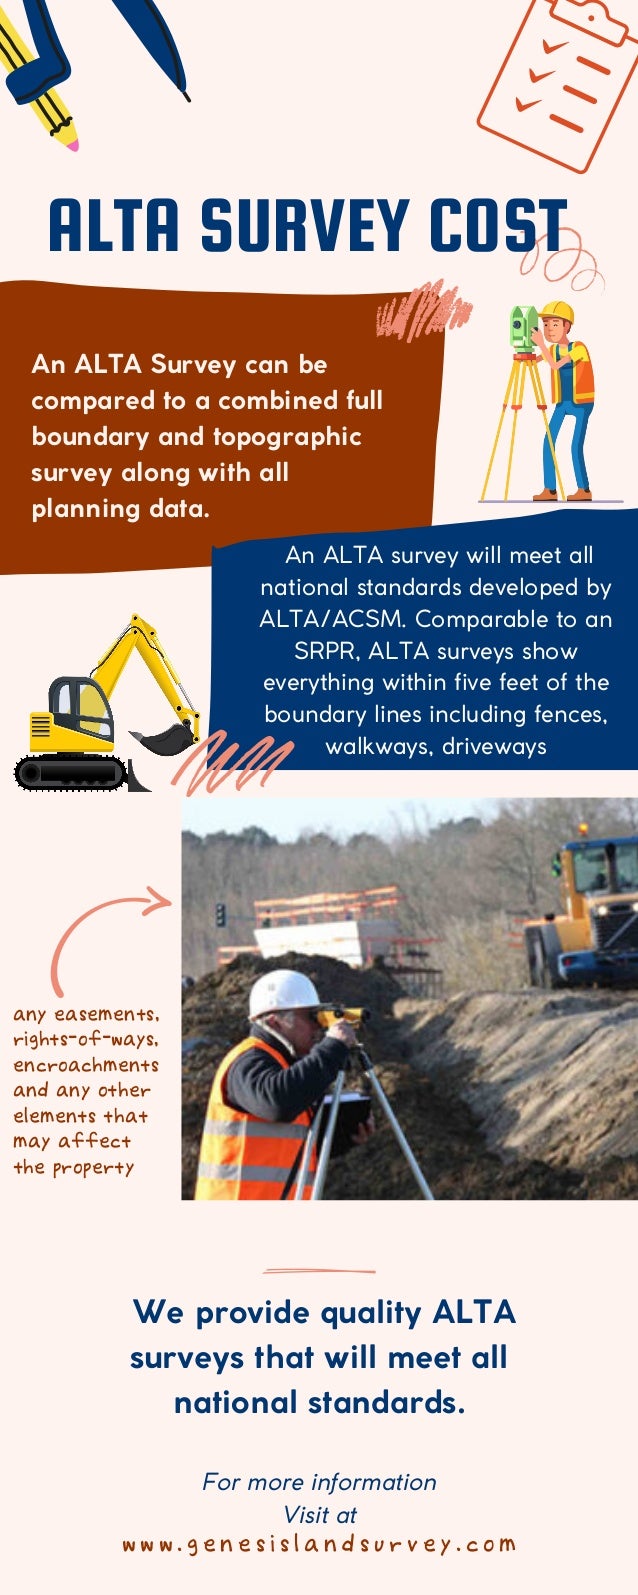 ALTA SURVEY COST
An ALTA Survey can be
compared to a combined full
boundary and topographic
survey along with all
planning data.
An ALTA survey will meet all
national standards developed by
ALTA/ACSM. Comparable to an
SRPR, ALTA surveys show
everything within five feet of the
boundary lines including fences,
walkways, driveways
any easements,
rights-of-ways,
encroachments
and any other
elements that
may affect
the property
w w w . g e n e s i s l a n d s u r v e y . c o m
For more information
Visit at
We provide quality ALTA
surveys that will meet all
national standards.
 